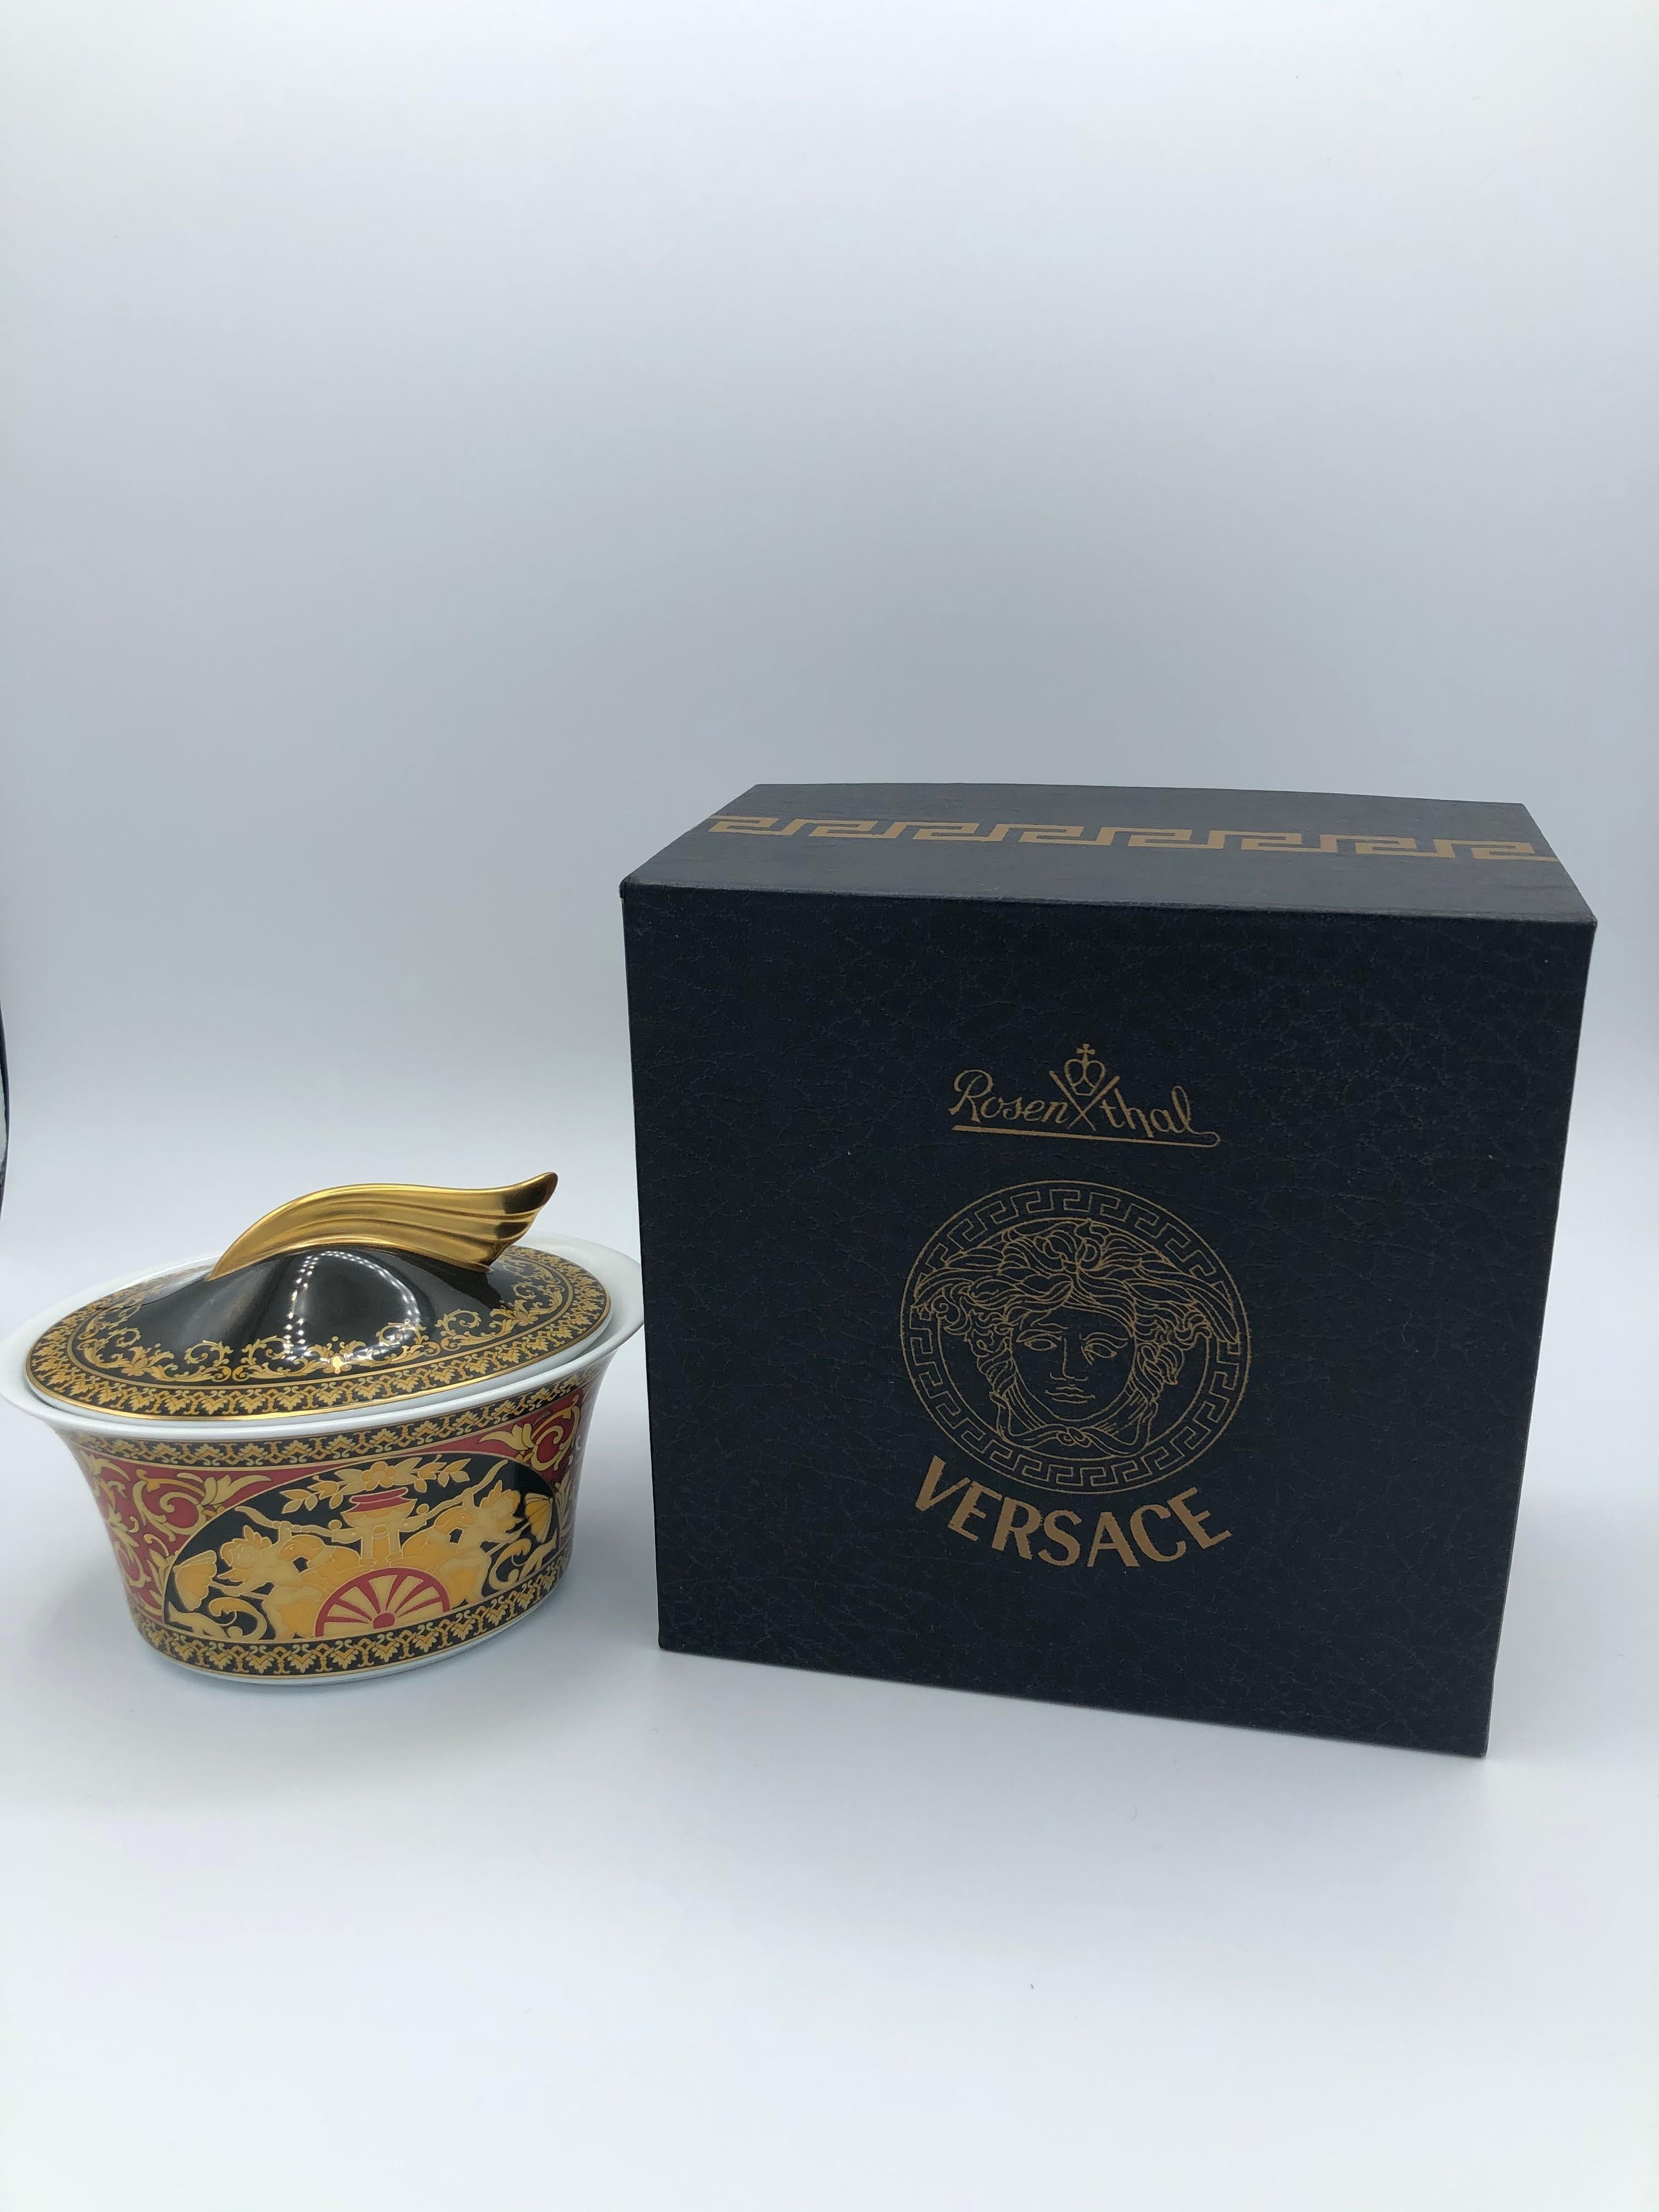 Rosenthal Versace Ikarus Medusa Sugar Bowl Design Paul Whimsical. Boxed. This stunning Versace dinnerware is called Medusa Red. It is produced using the finest porcelain creating a style that is best described as luxurious and glamorous. The covered